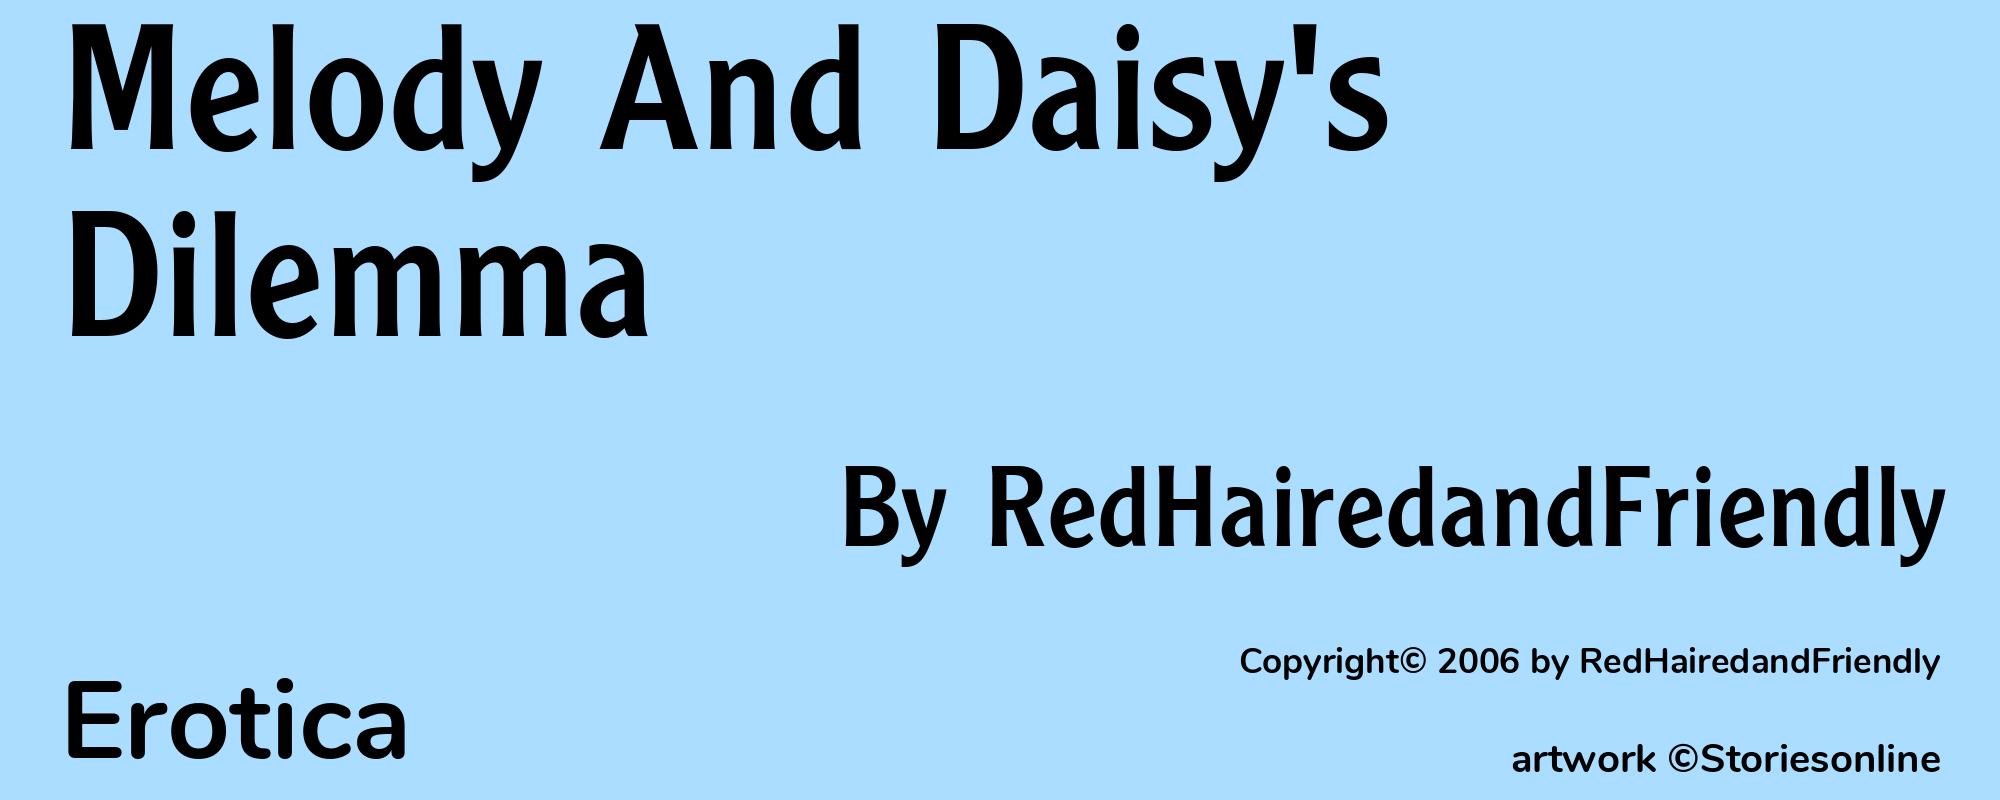 Melody And Daisy's Dilemma - Cover